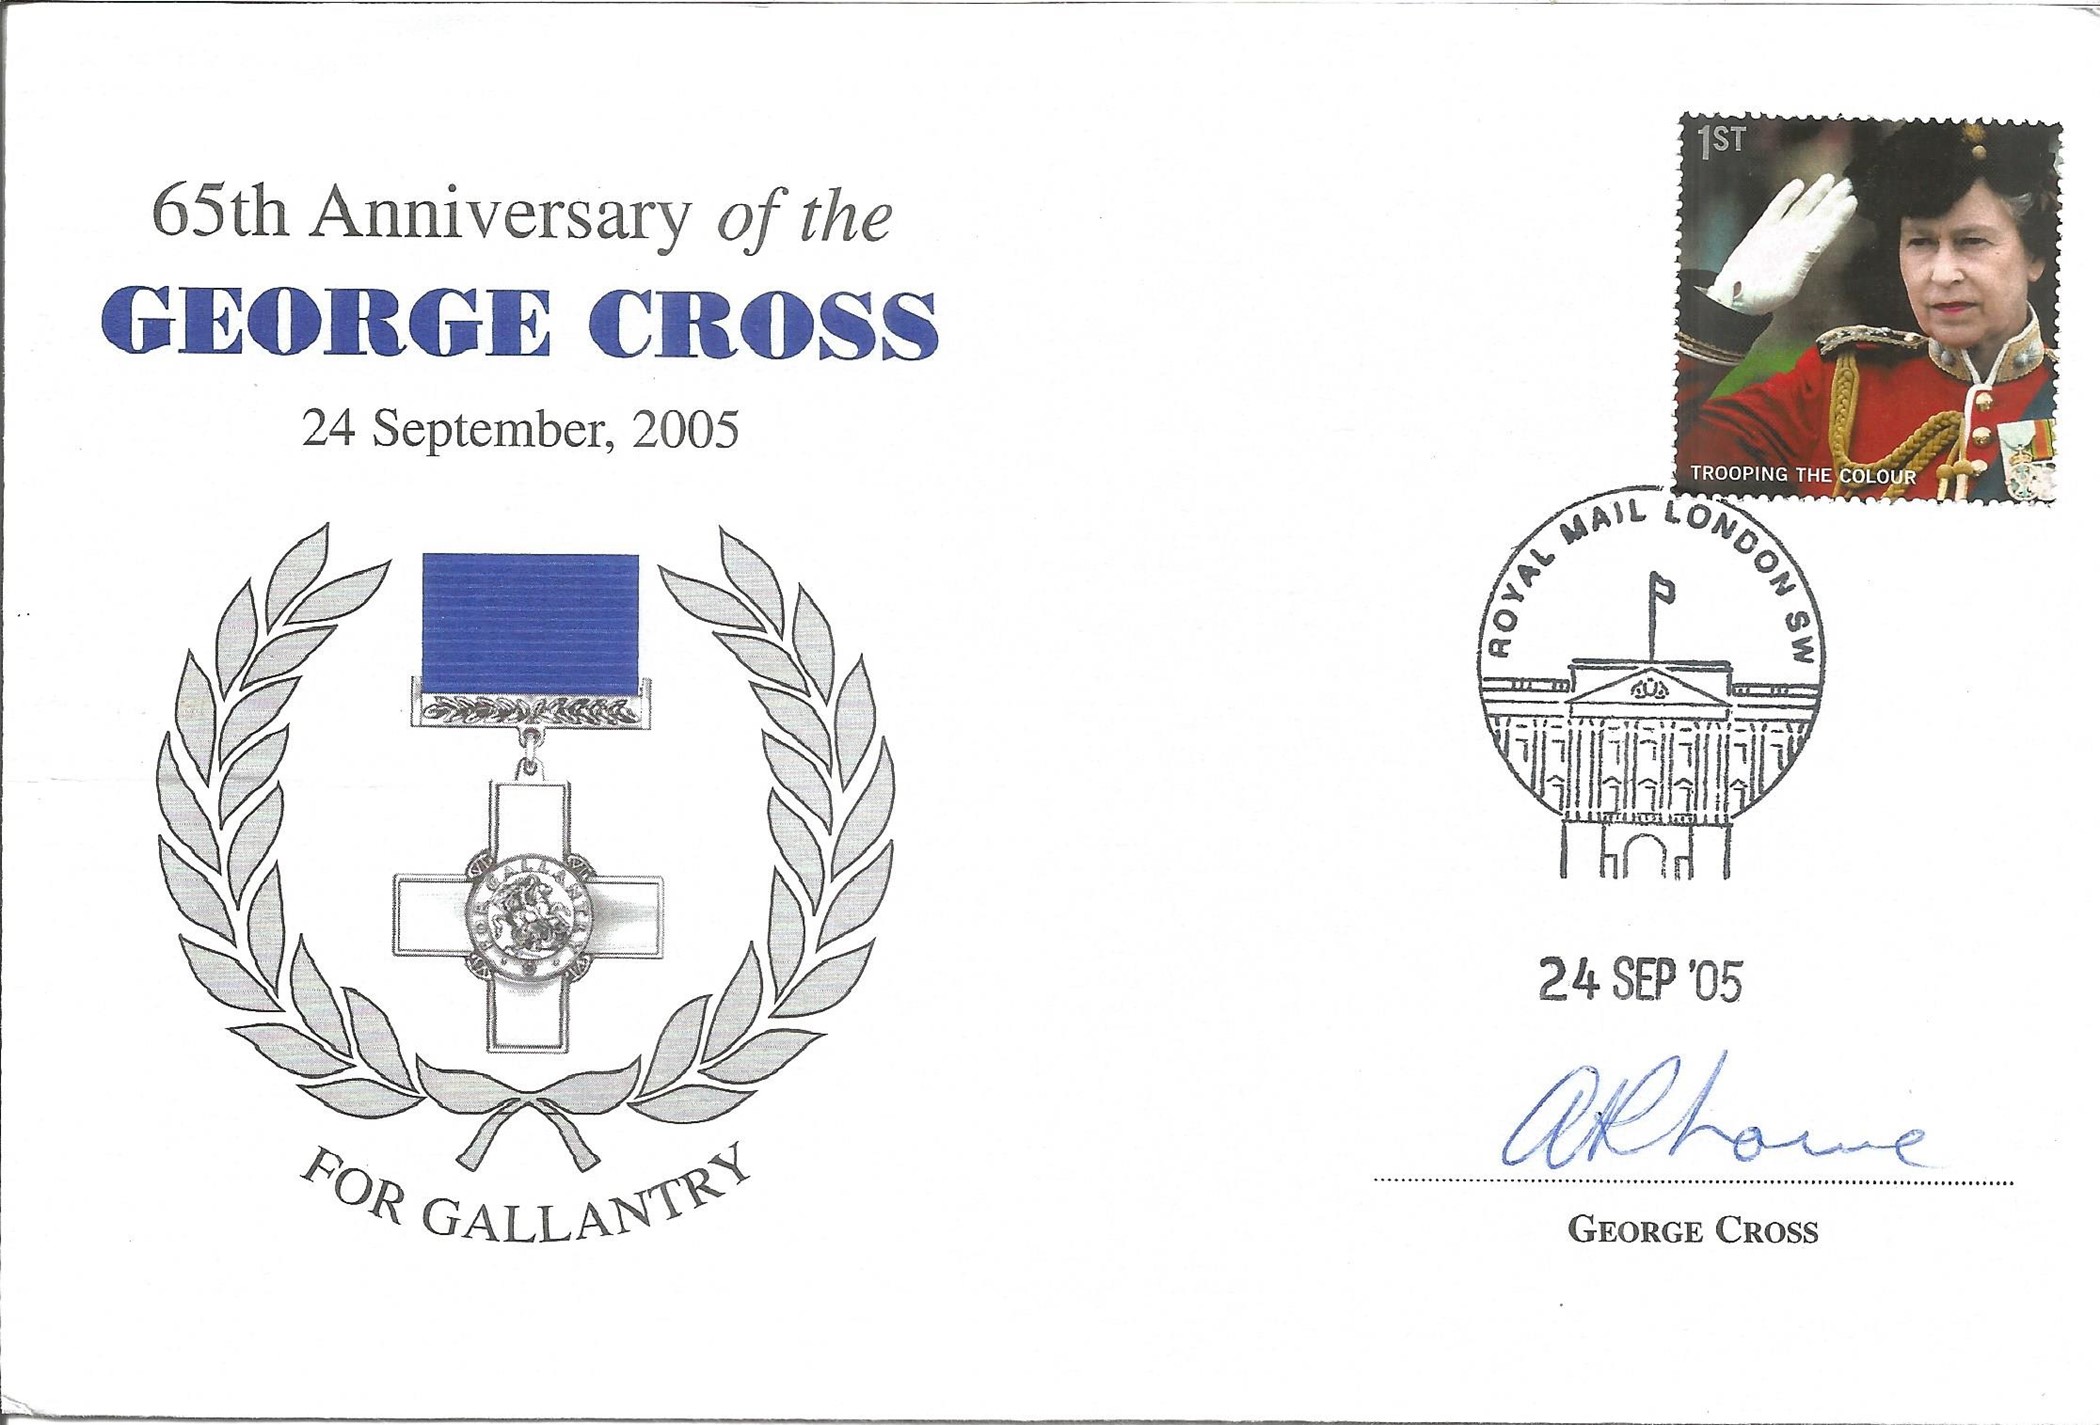 Alfred Lowe GC Signed 65th Anniversary of the George Cross 24 September 2005 FDC. British Stamp with